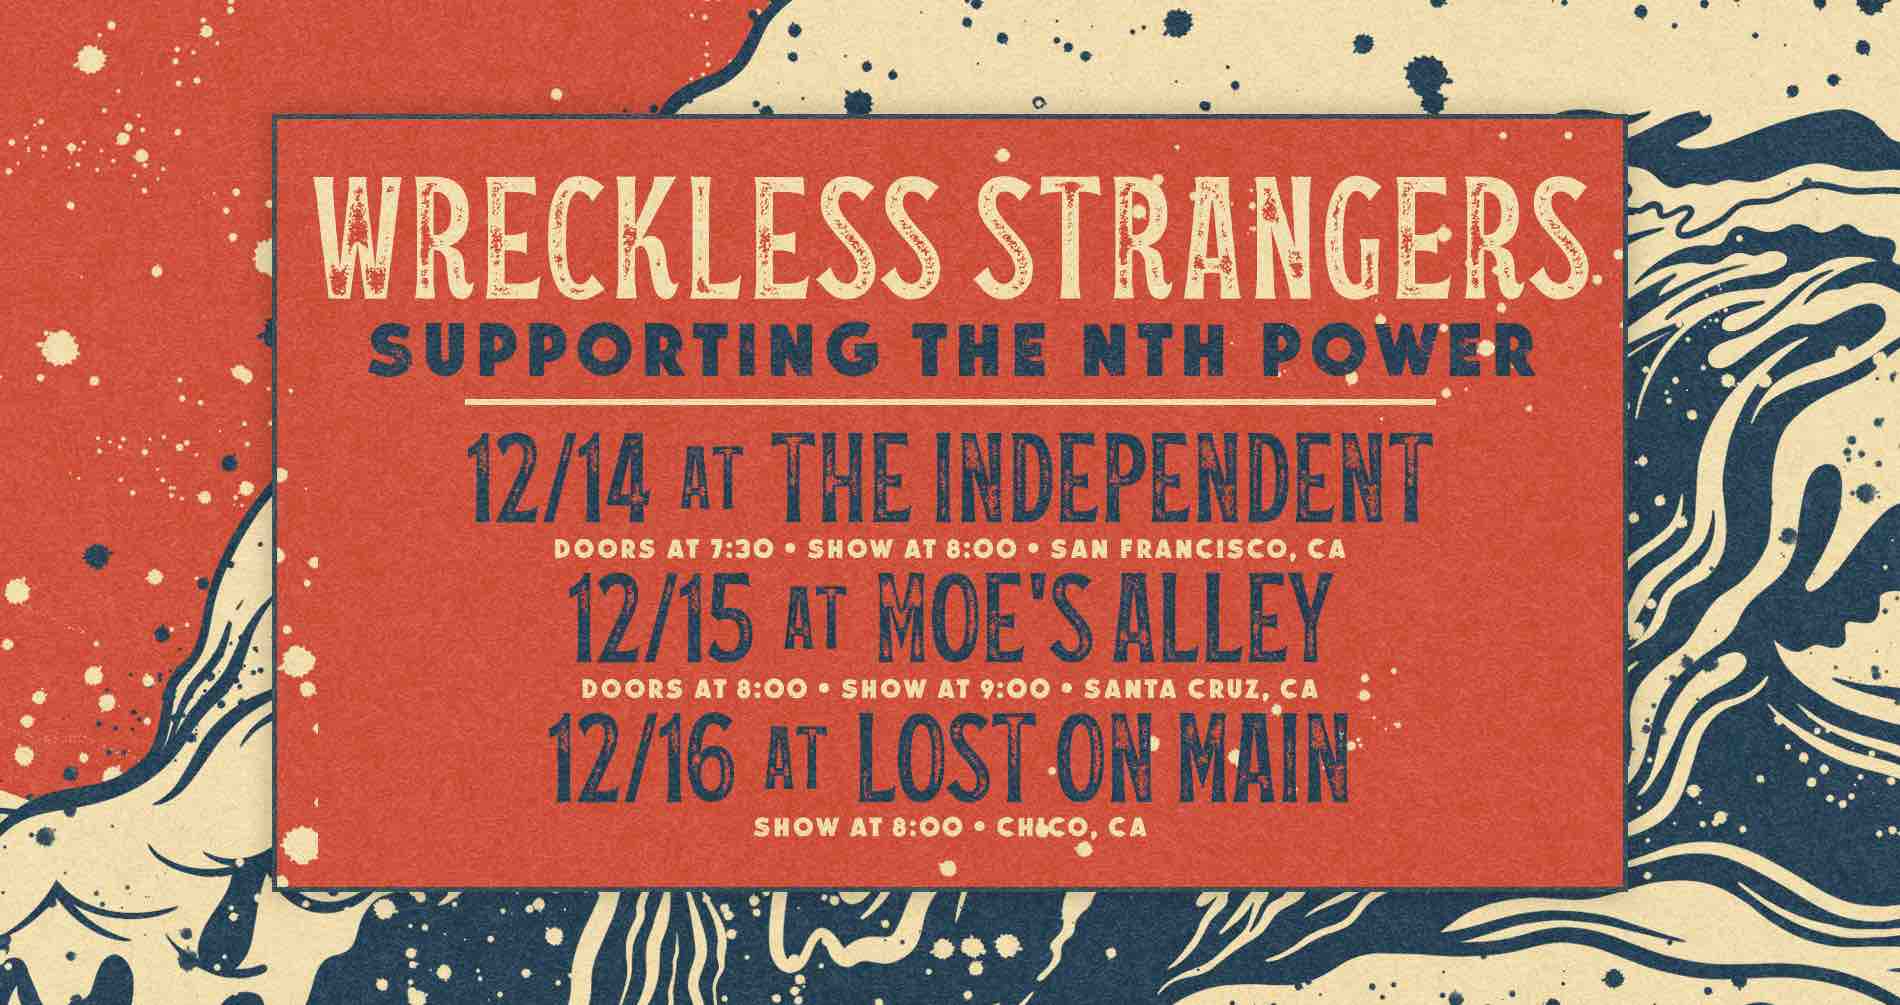 Wreckless Strangers and The Nth Power bring funky, soulful, rock, rhythm & blues to San Francisco, Santa Cruz, and Chico